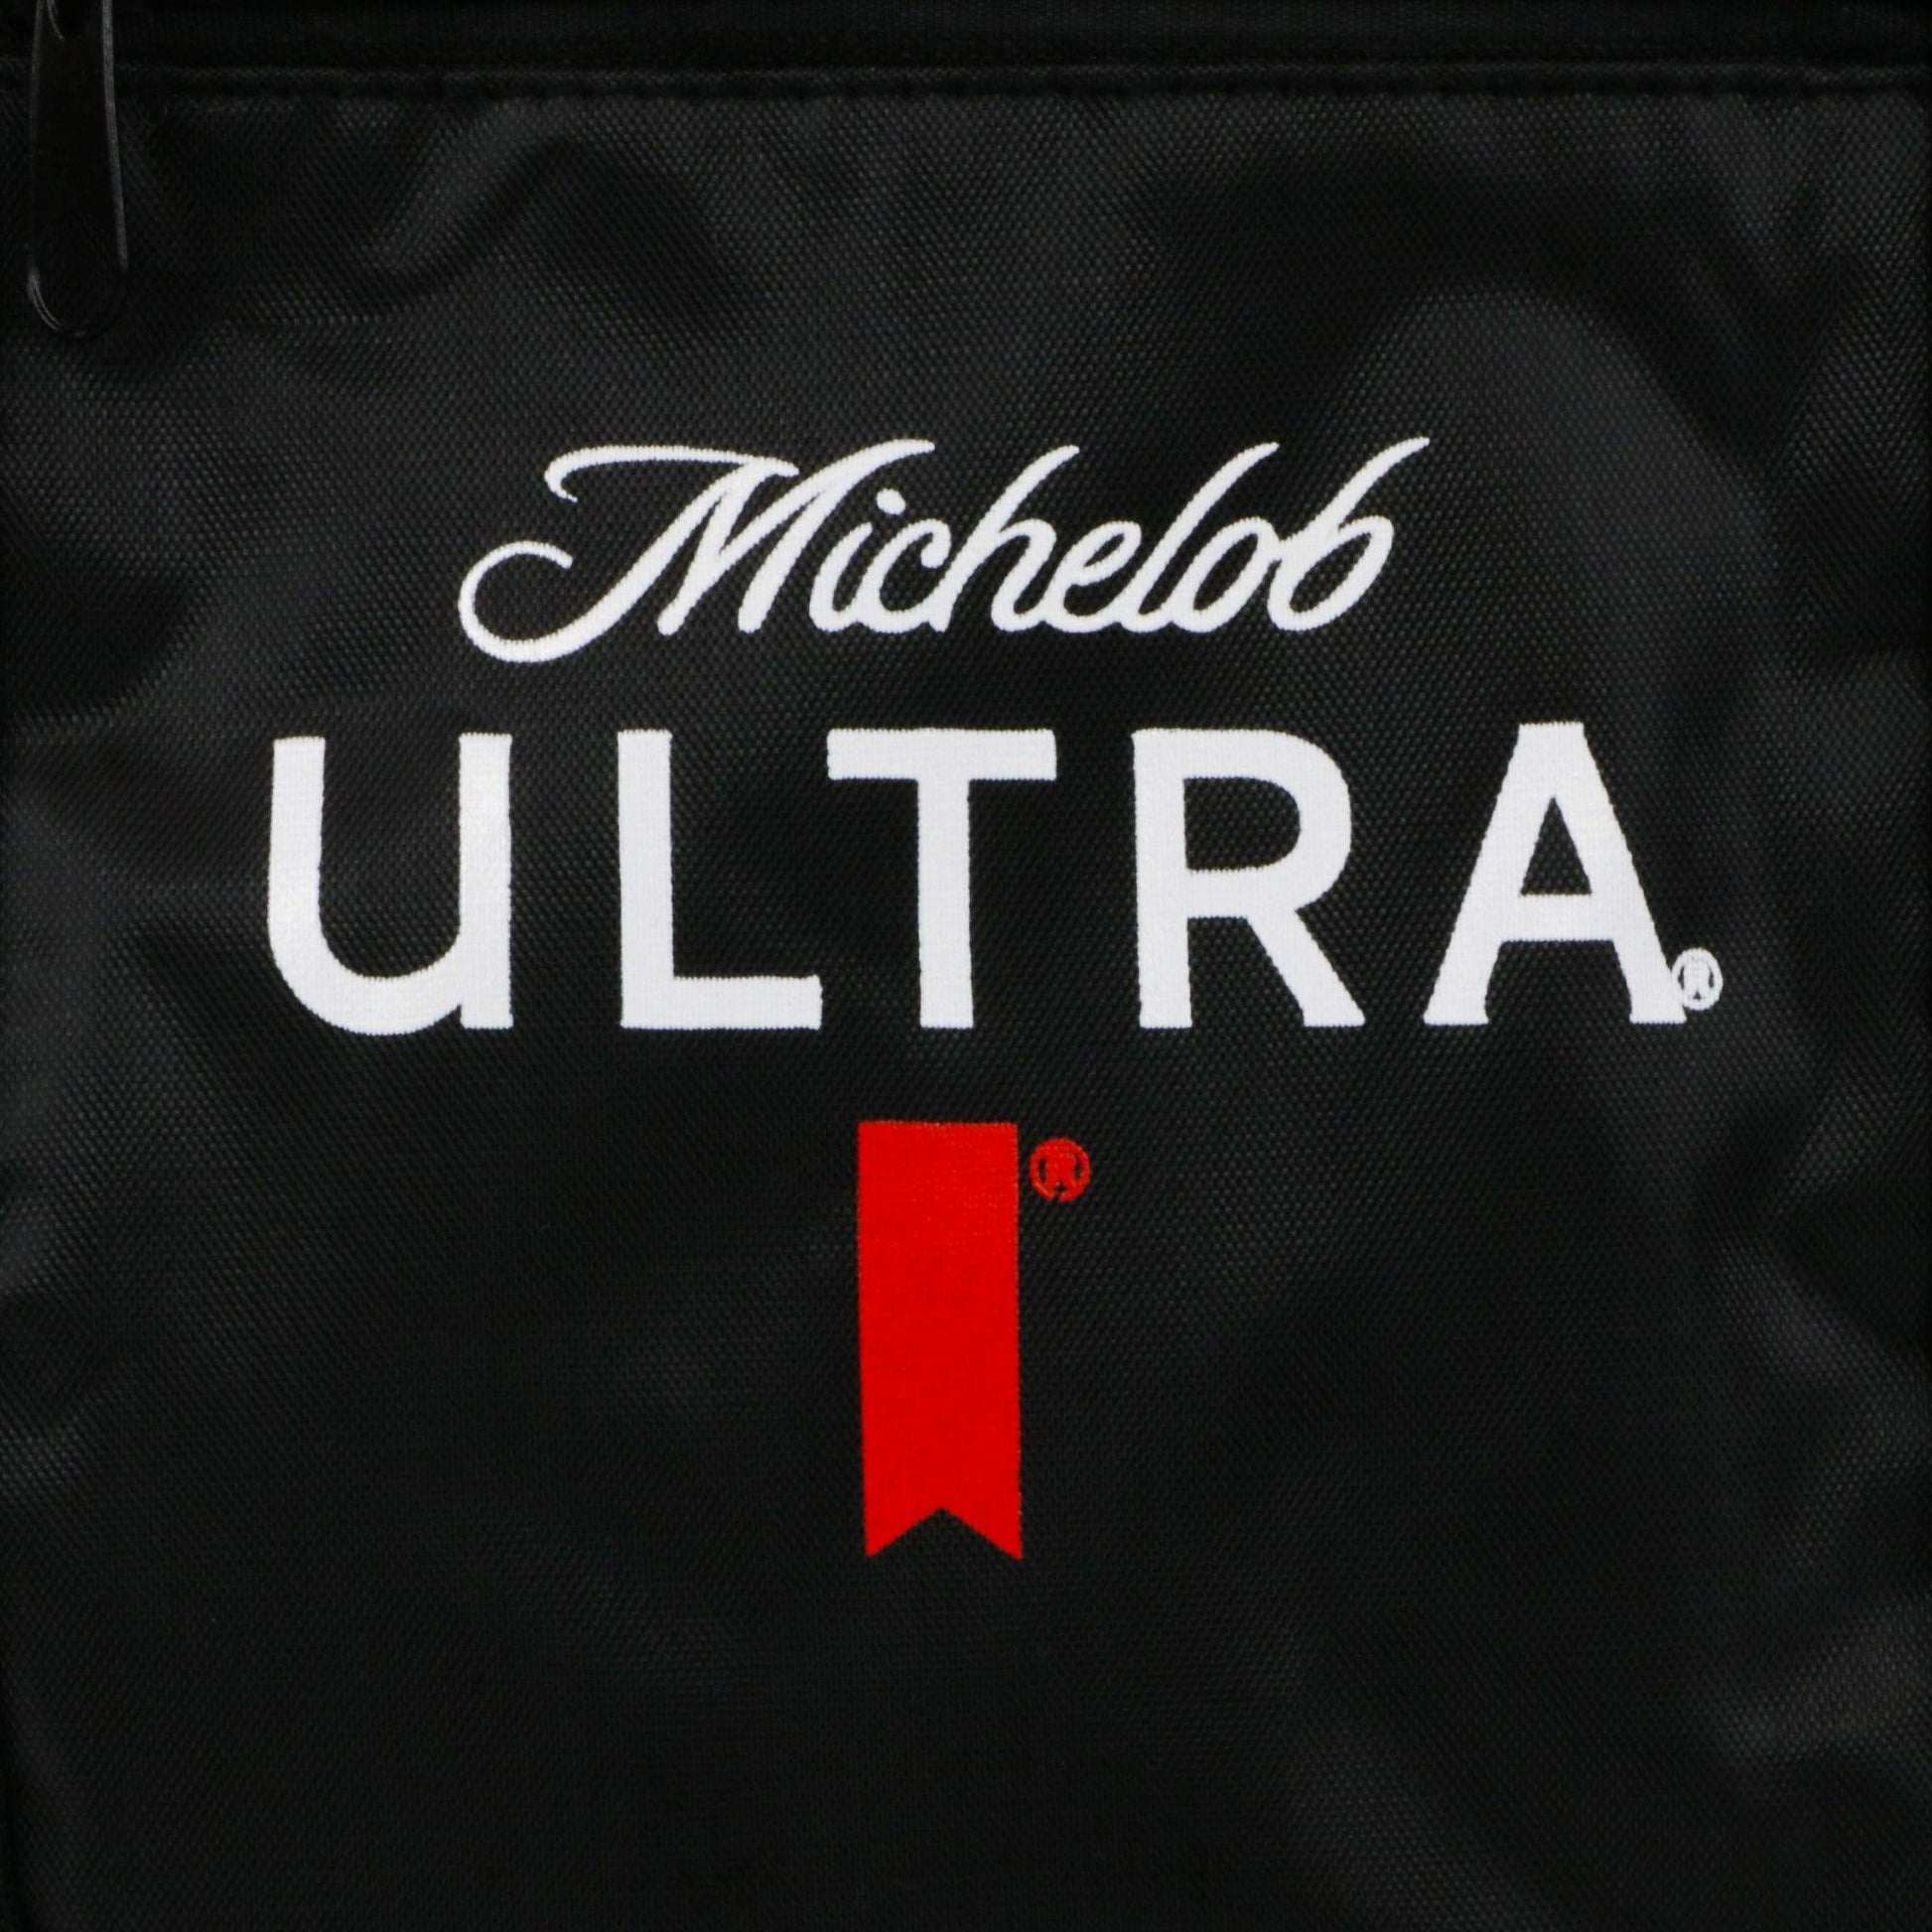 Close up of Michelob ULTRA logo with ribbon